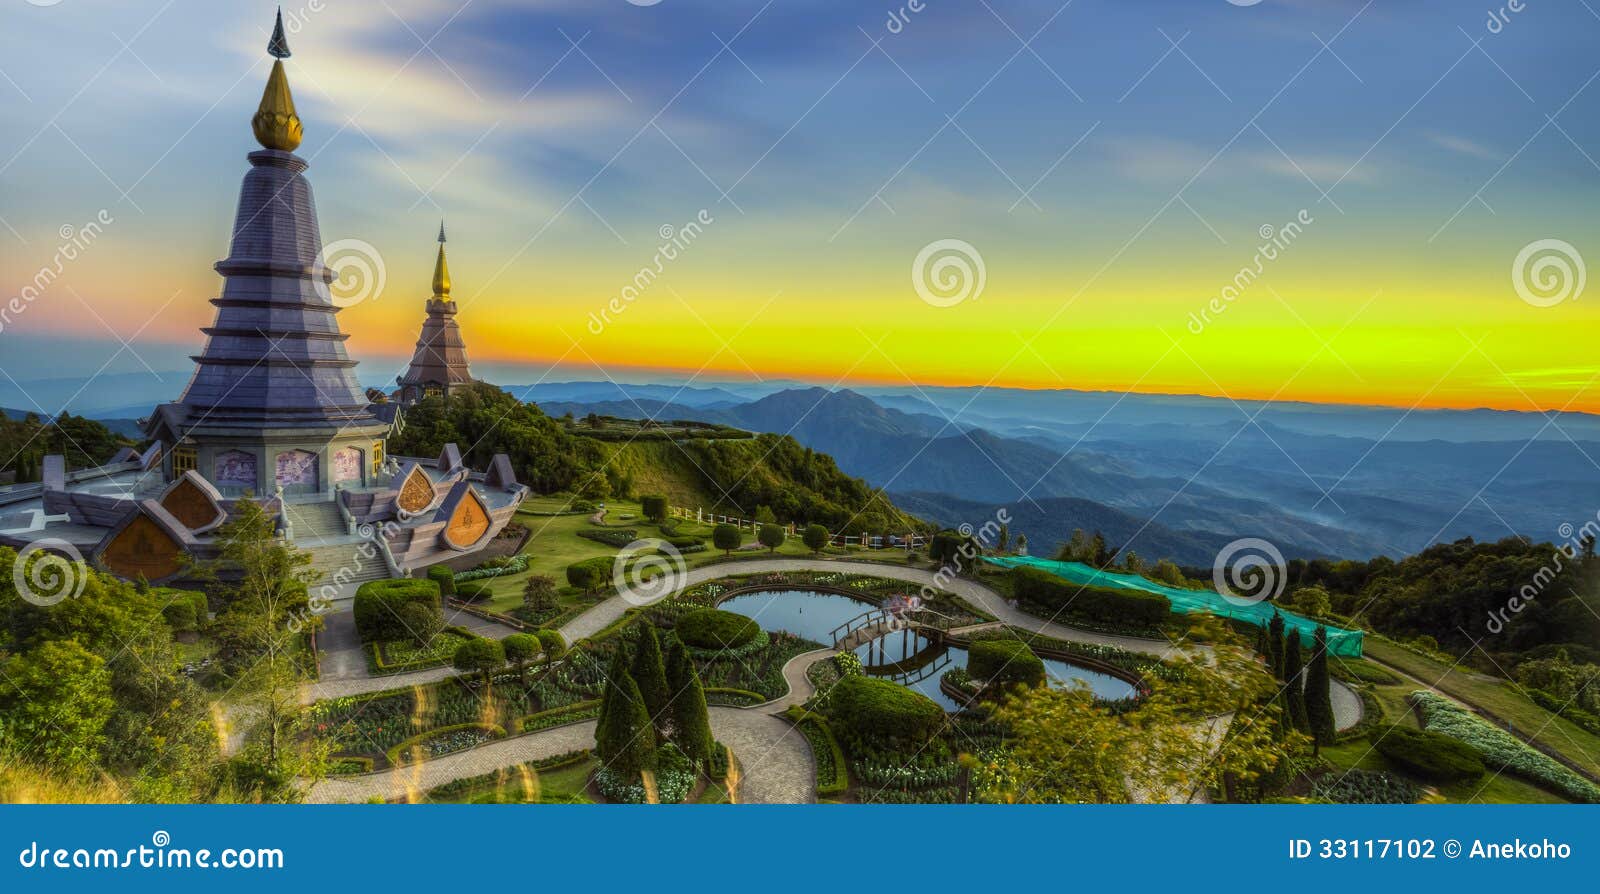 landscape of two pagoda at doi inthanon